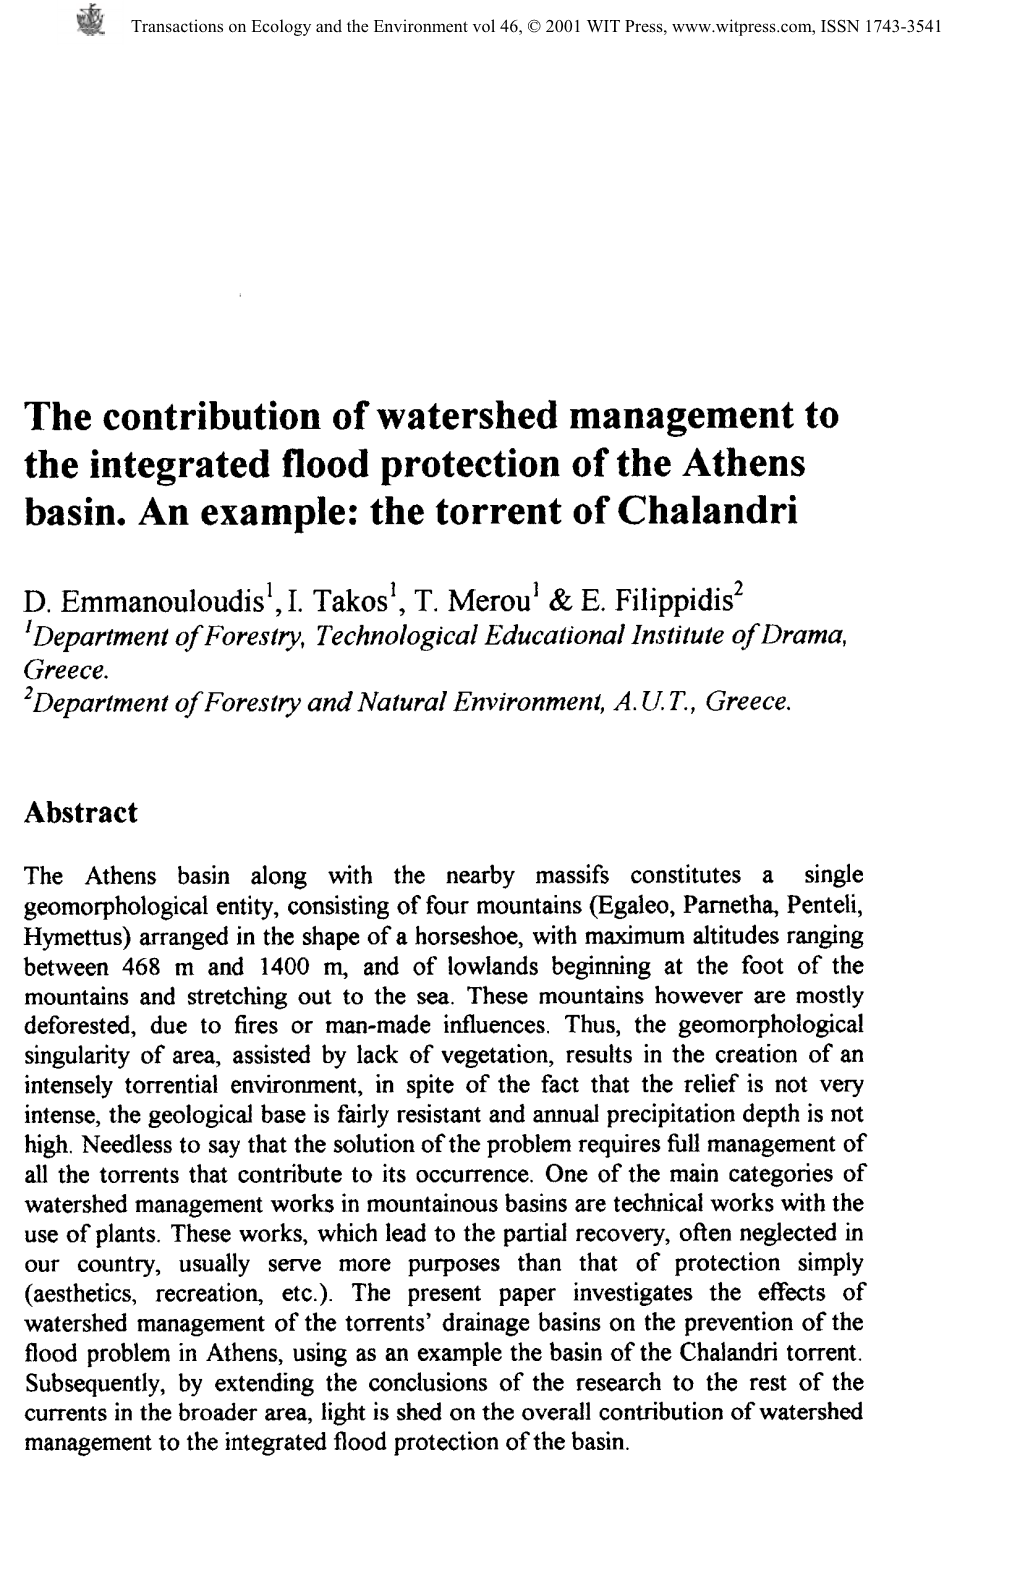 The Contribution of Watershed Management to the Integrated Flood Protection of the Athens Basin. an Example: the Torrent of Chalandri